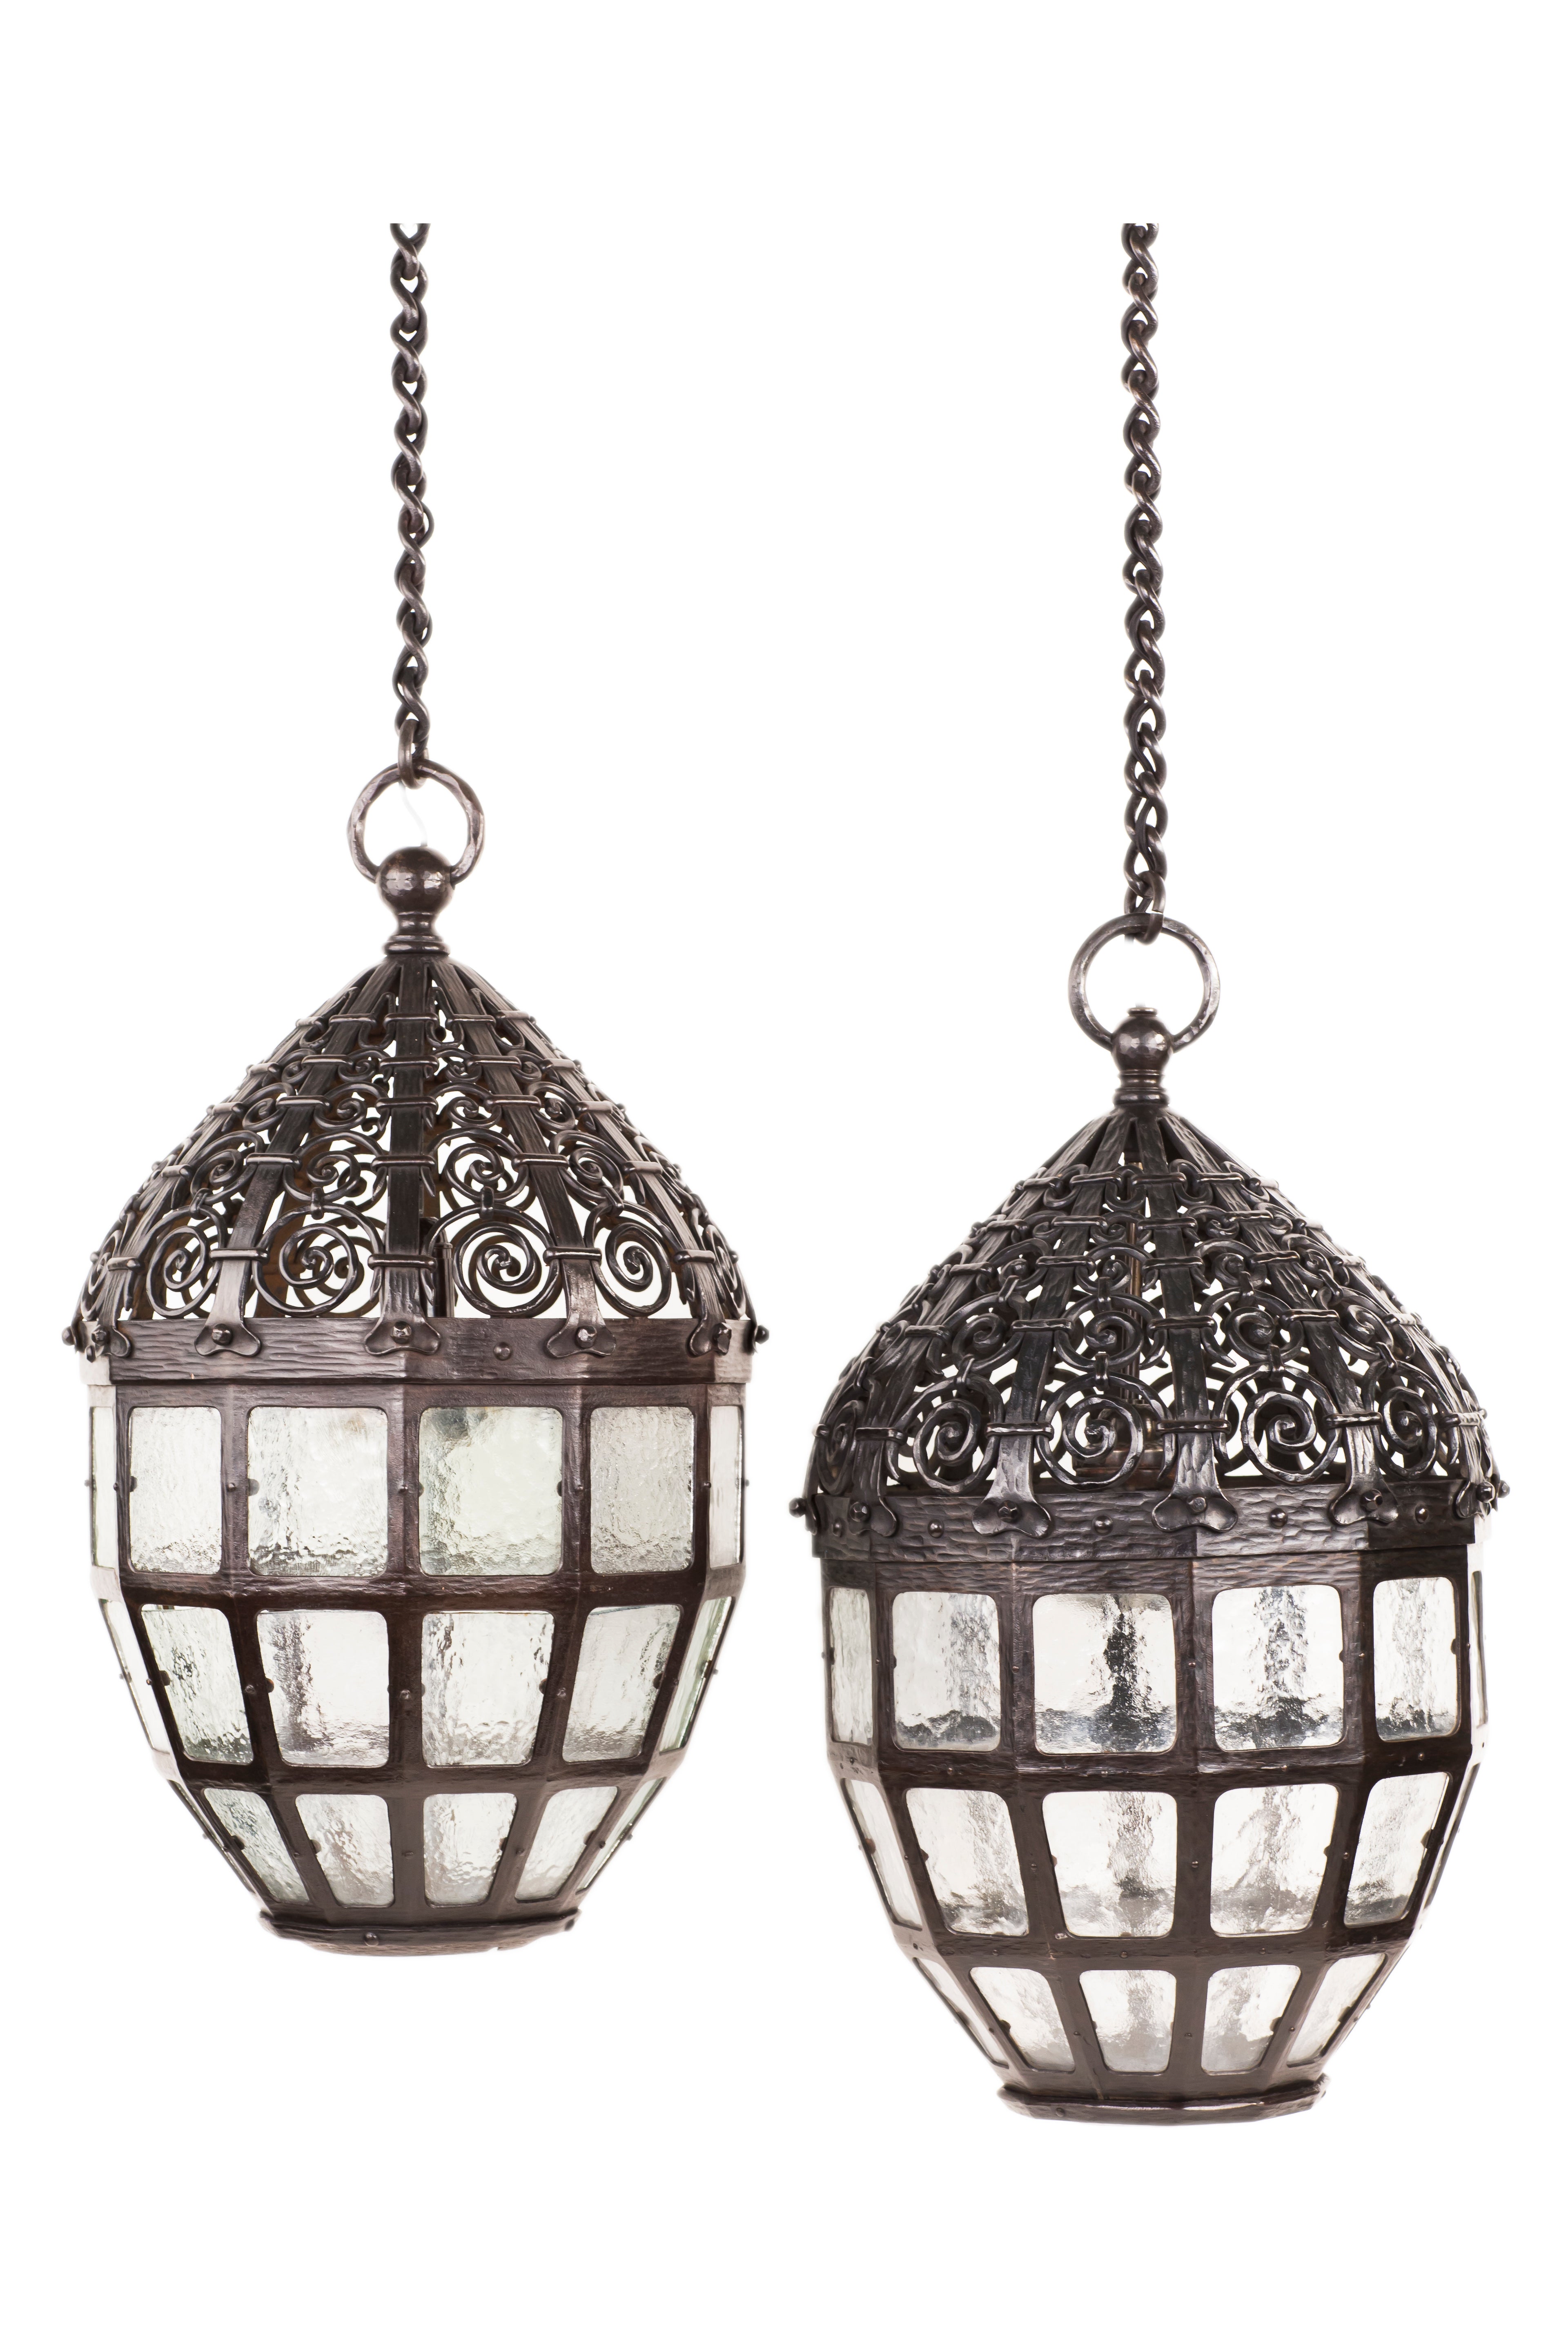 Pair of Art Nouveau Wrought Iron Chandeliers by Carl Westman